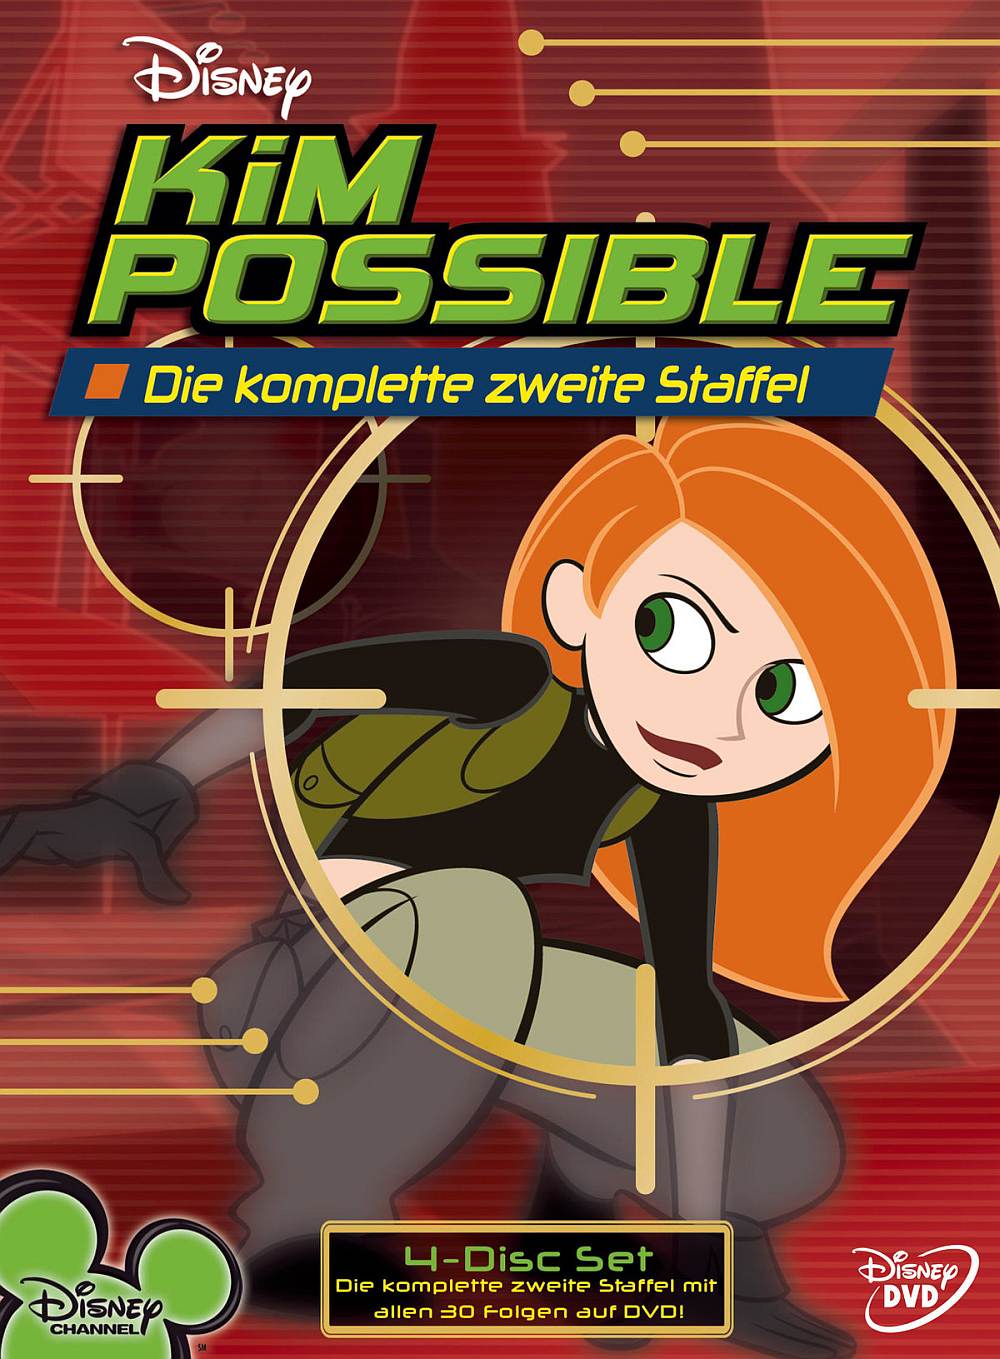 cindy drysdale share kim possible and shego naked photos